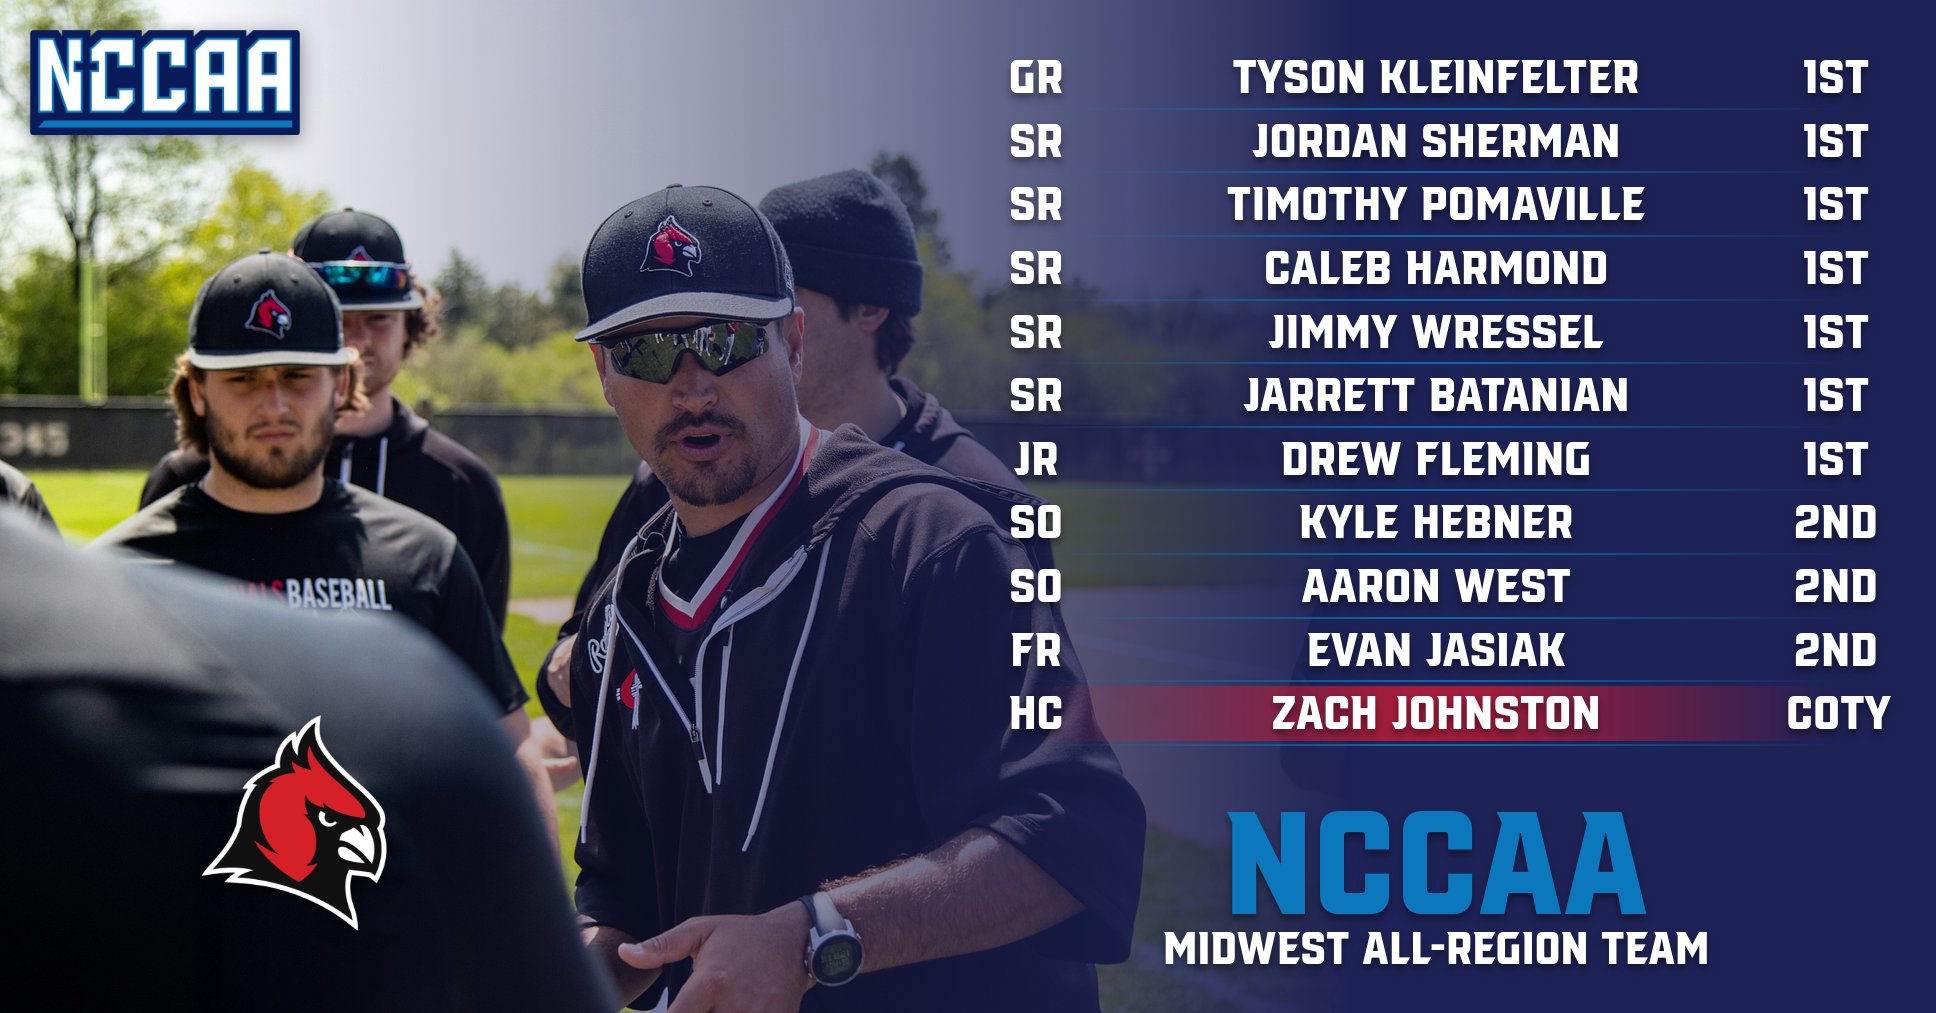 Baseball see's 10 named to NCCAA Midwest All-Region team